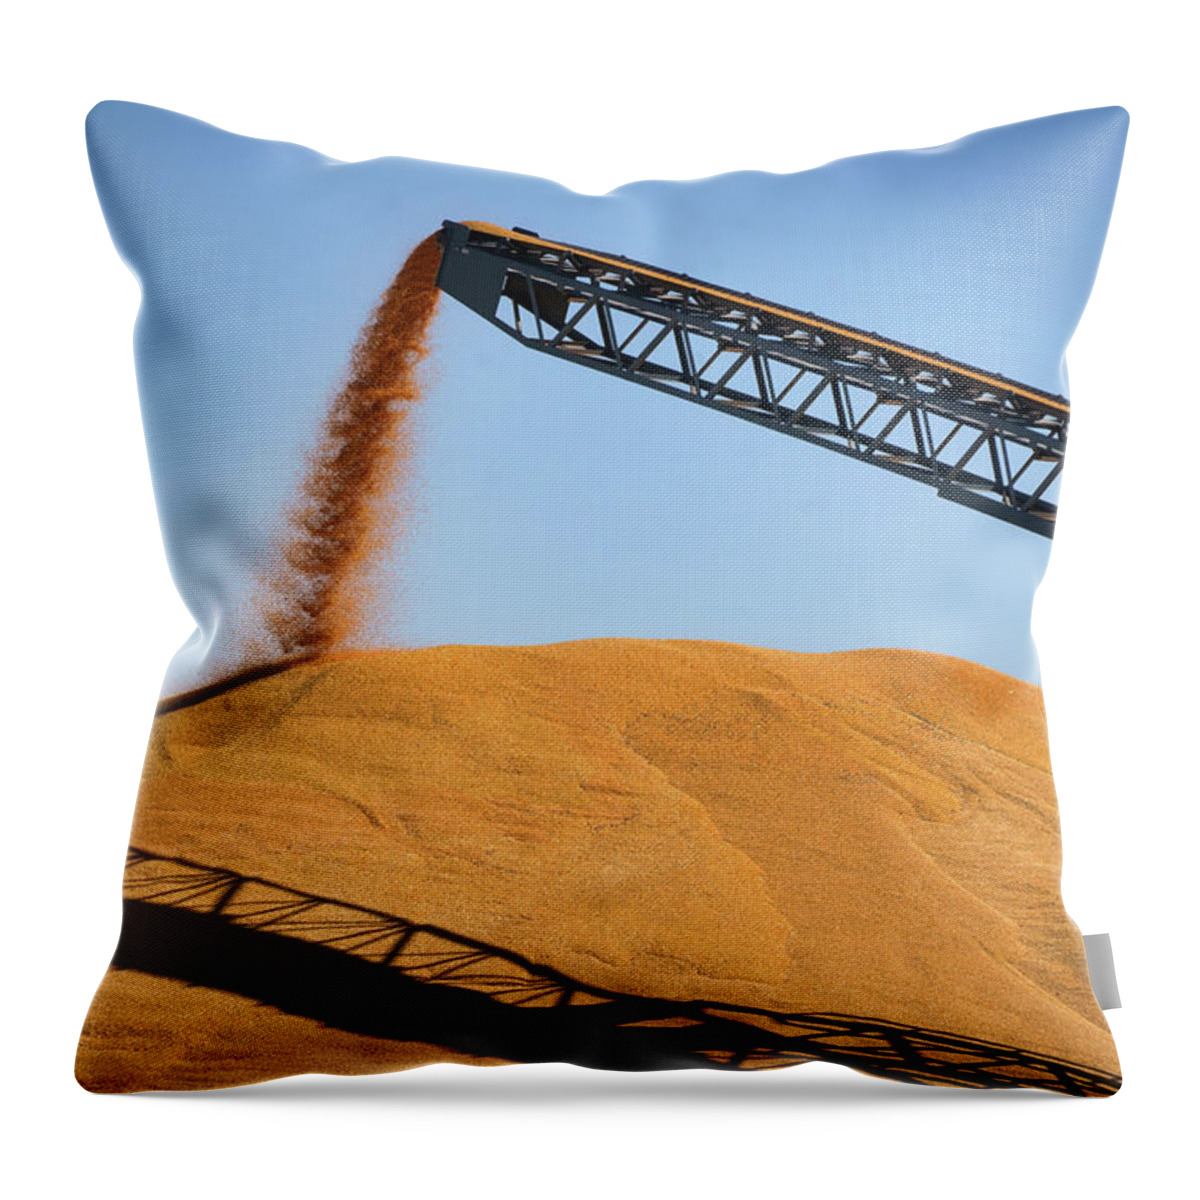 Agriculture Throw Pillow featuring the photograph Harvesting Gold - Corn - Grain Pile by Nikolyn McDonald